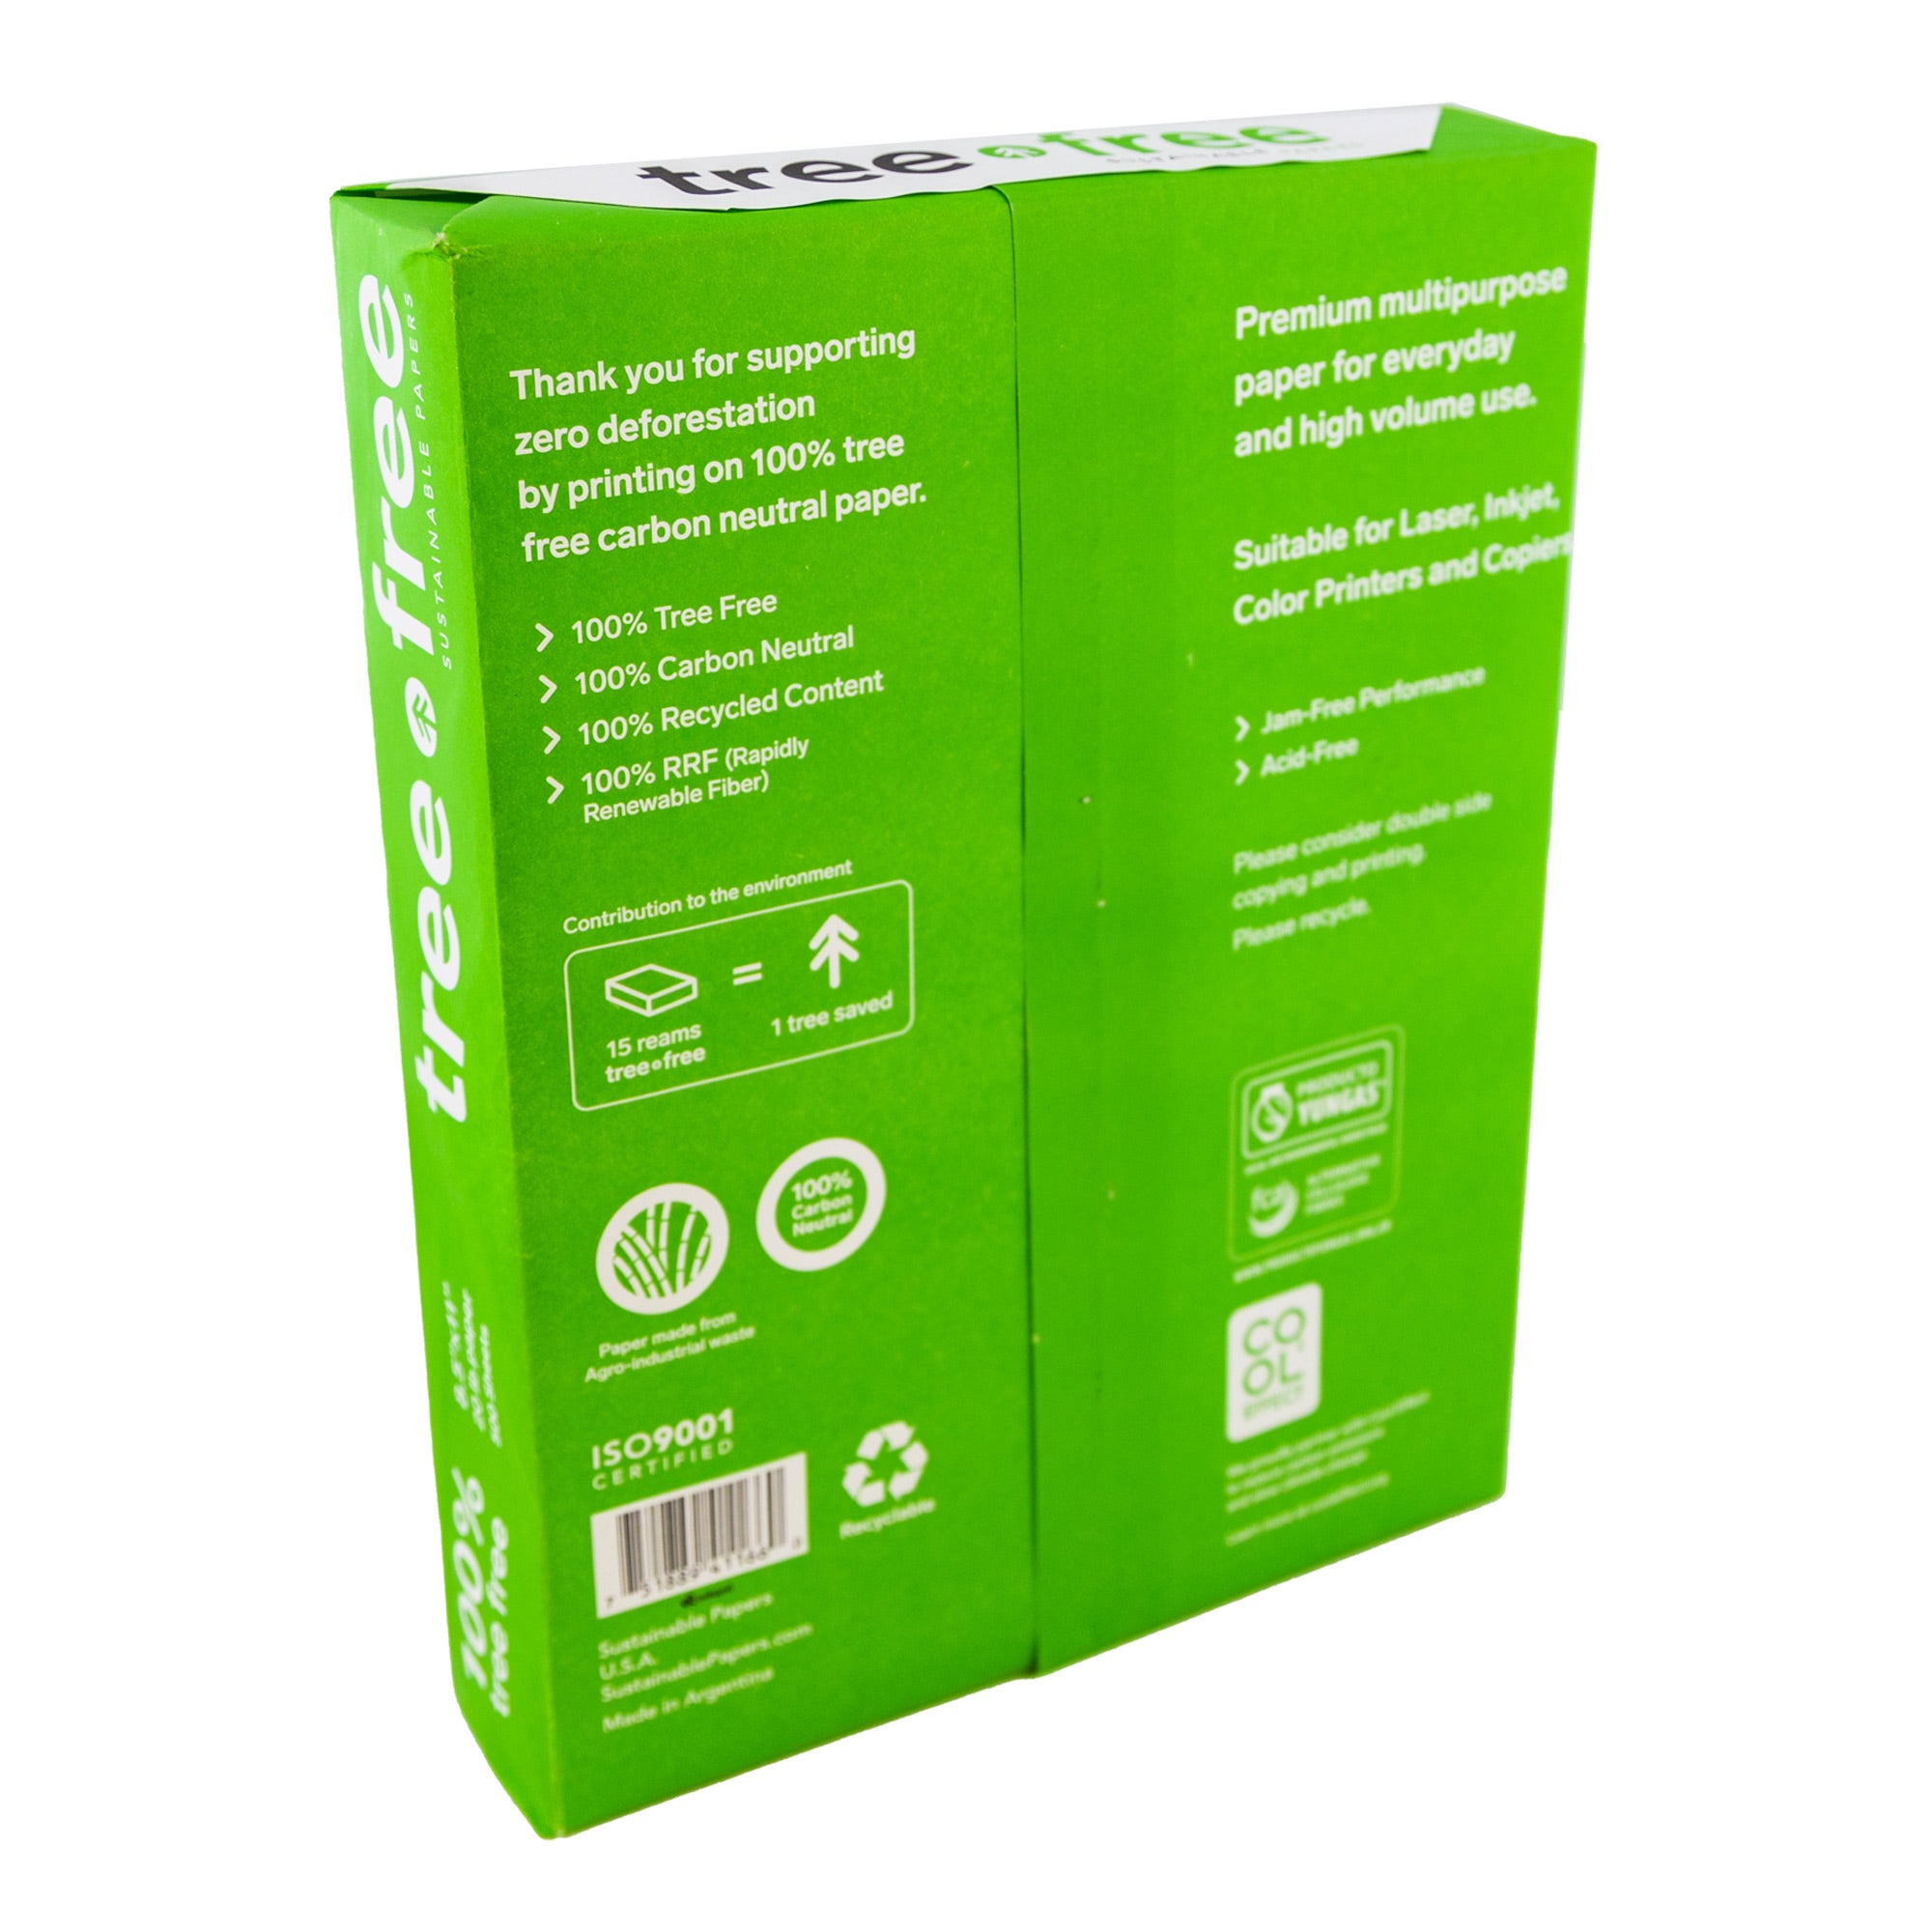 Elementree® Printer Paper - White, 500 ct / 8.5 x 11 in - Fry's